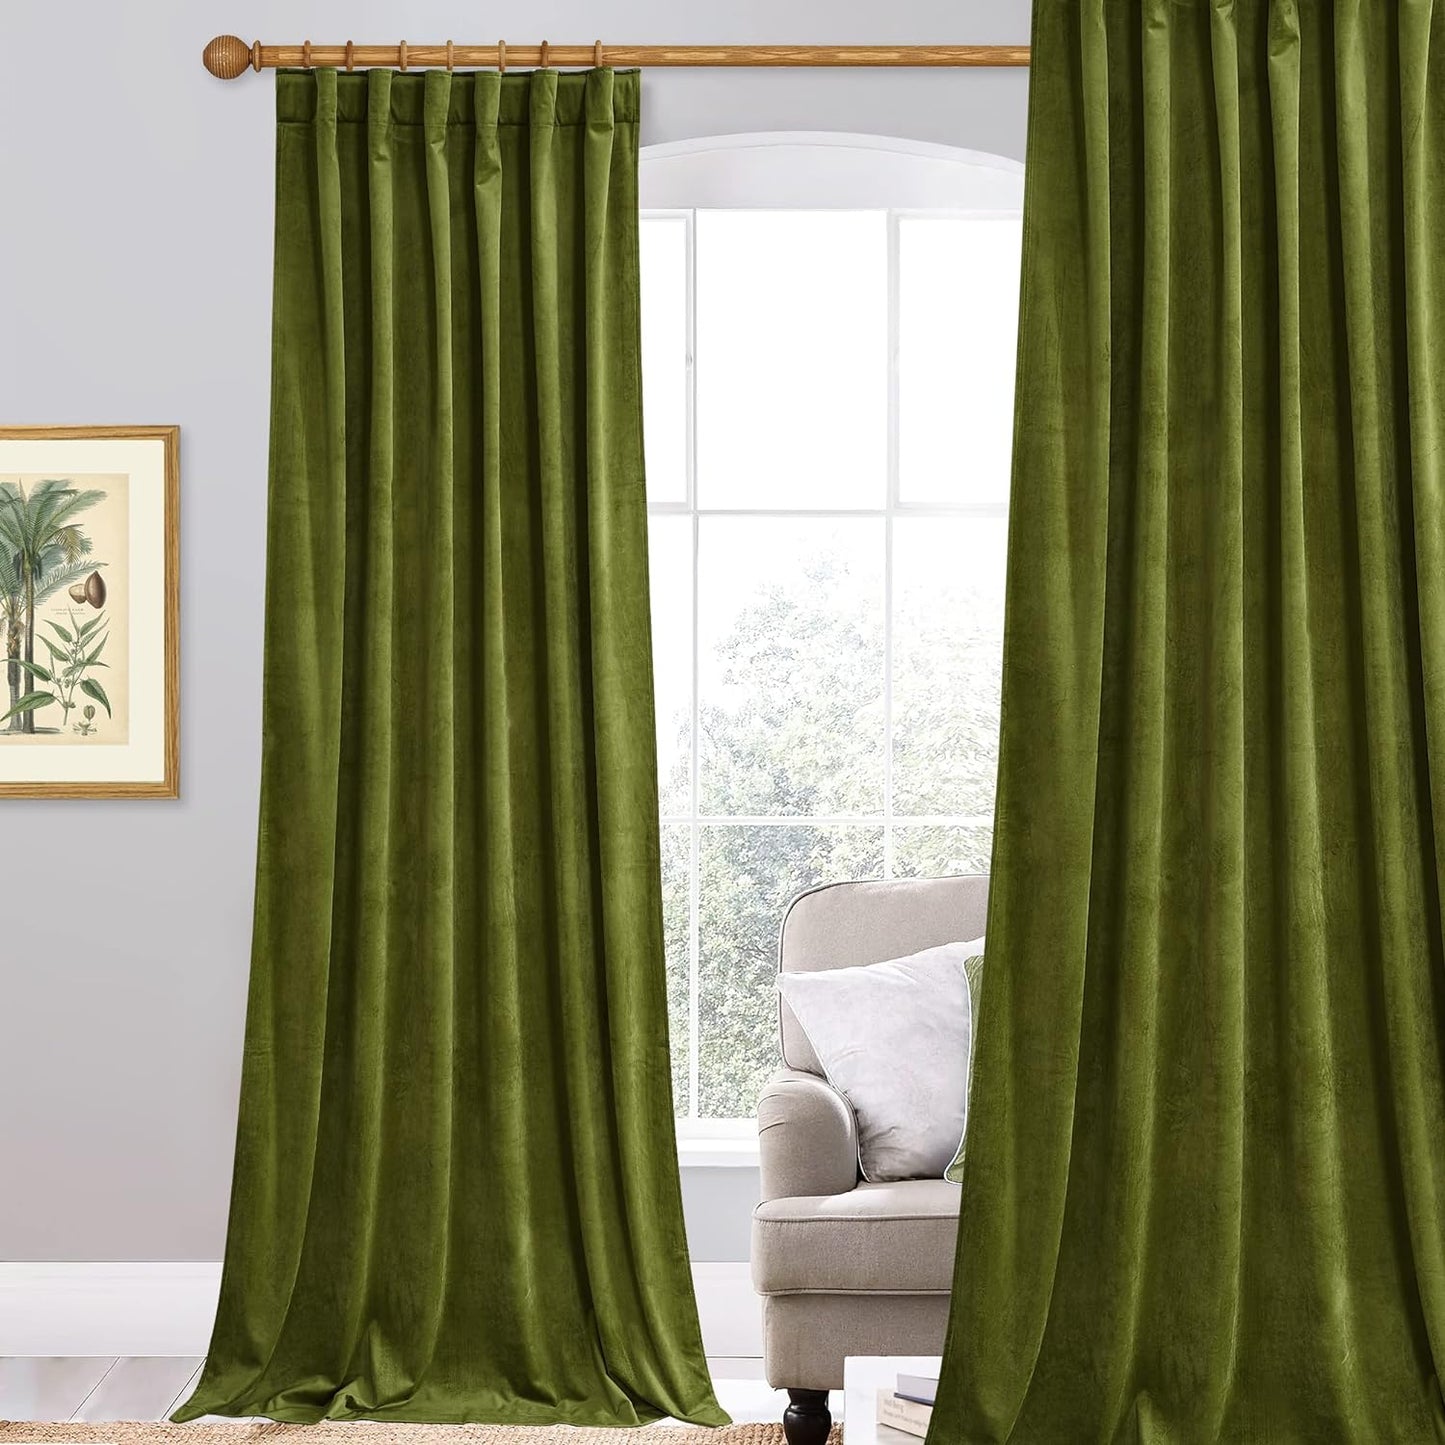 Stangh Navy Blue Velvet Curtains 96 Inches Long for Living Room, Luxury Blackout Sliding Door Curtains Thermal Insulated Window Drapes for Bedroom, W52 X L96 Inches, 1 Panel  StangH Olive Green W52 X L108 